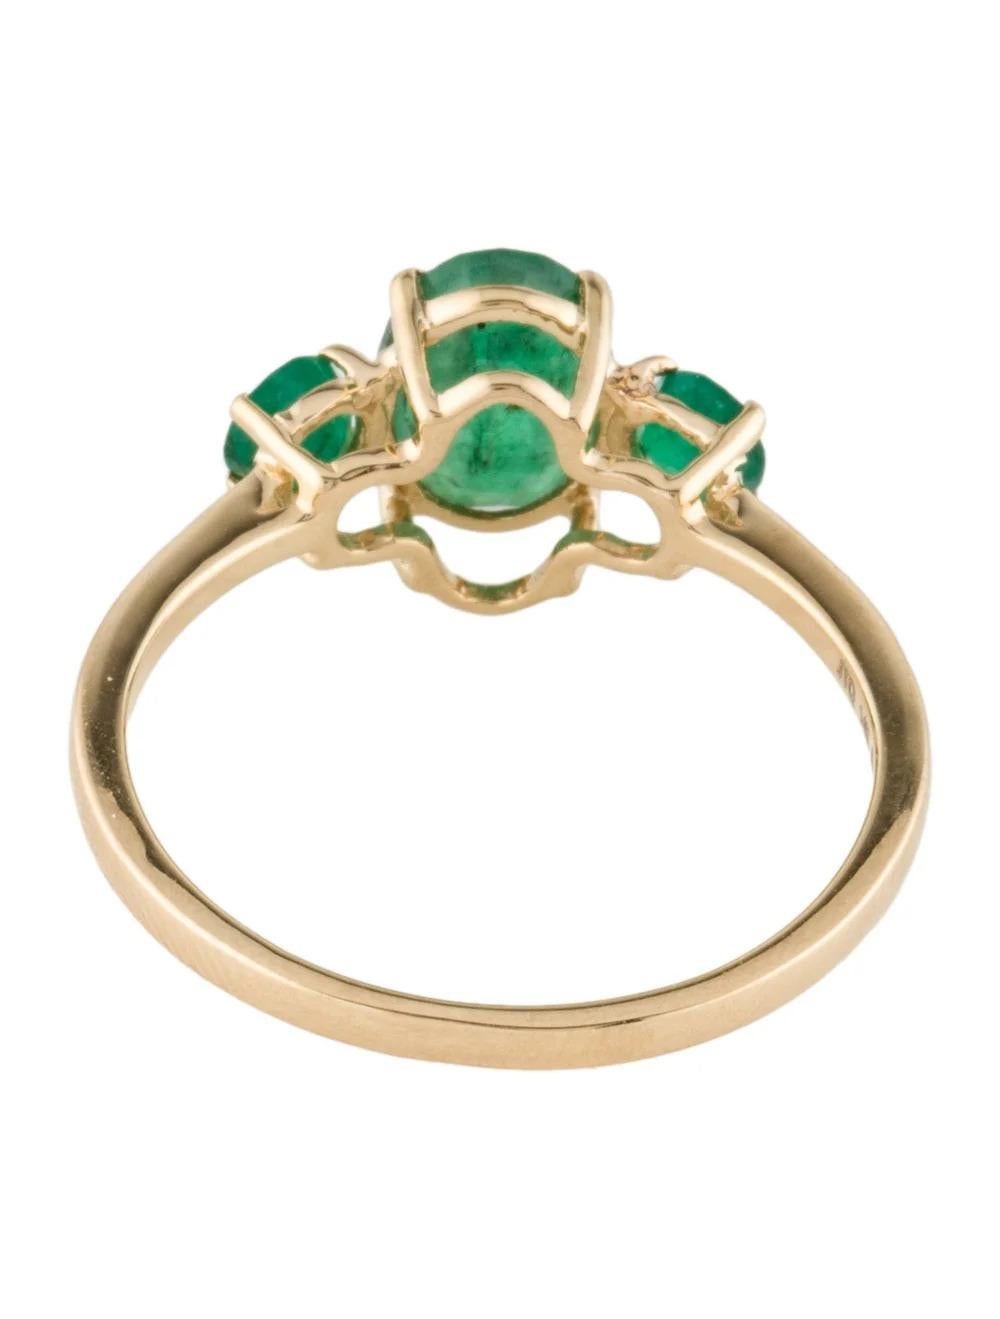 14K Emerald Cocktail Ring, Size 6.75: Stunning Design, Vibrant Color, Timeless In New Condition For Sale In Holtsville, NY